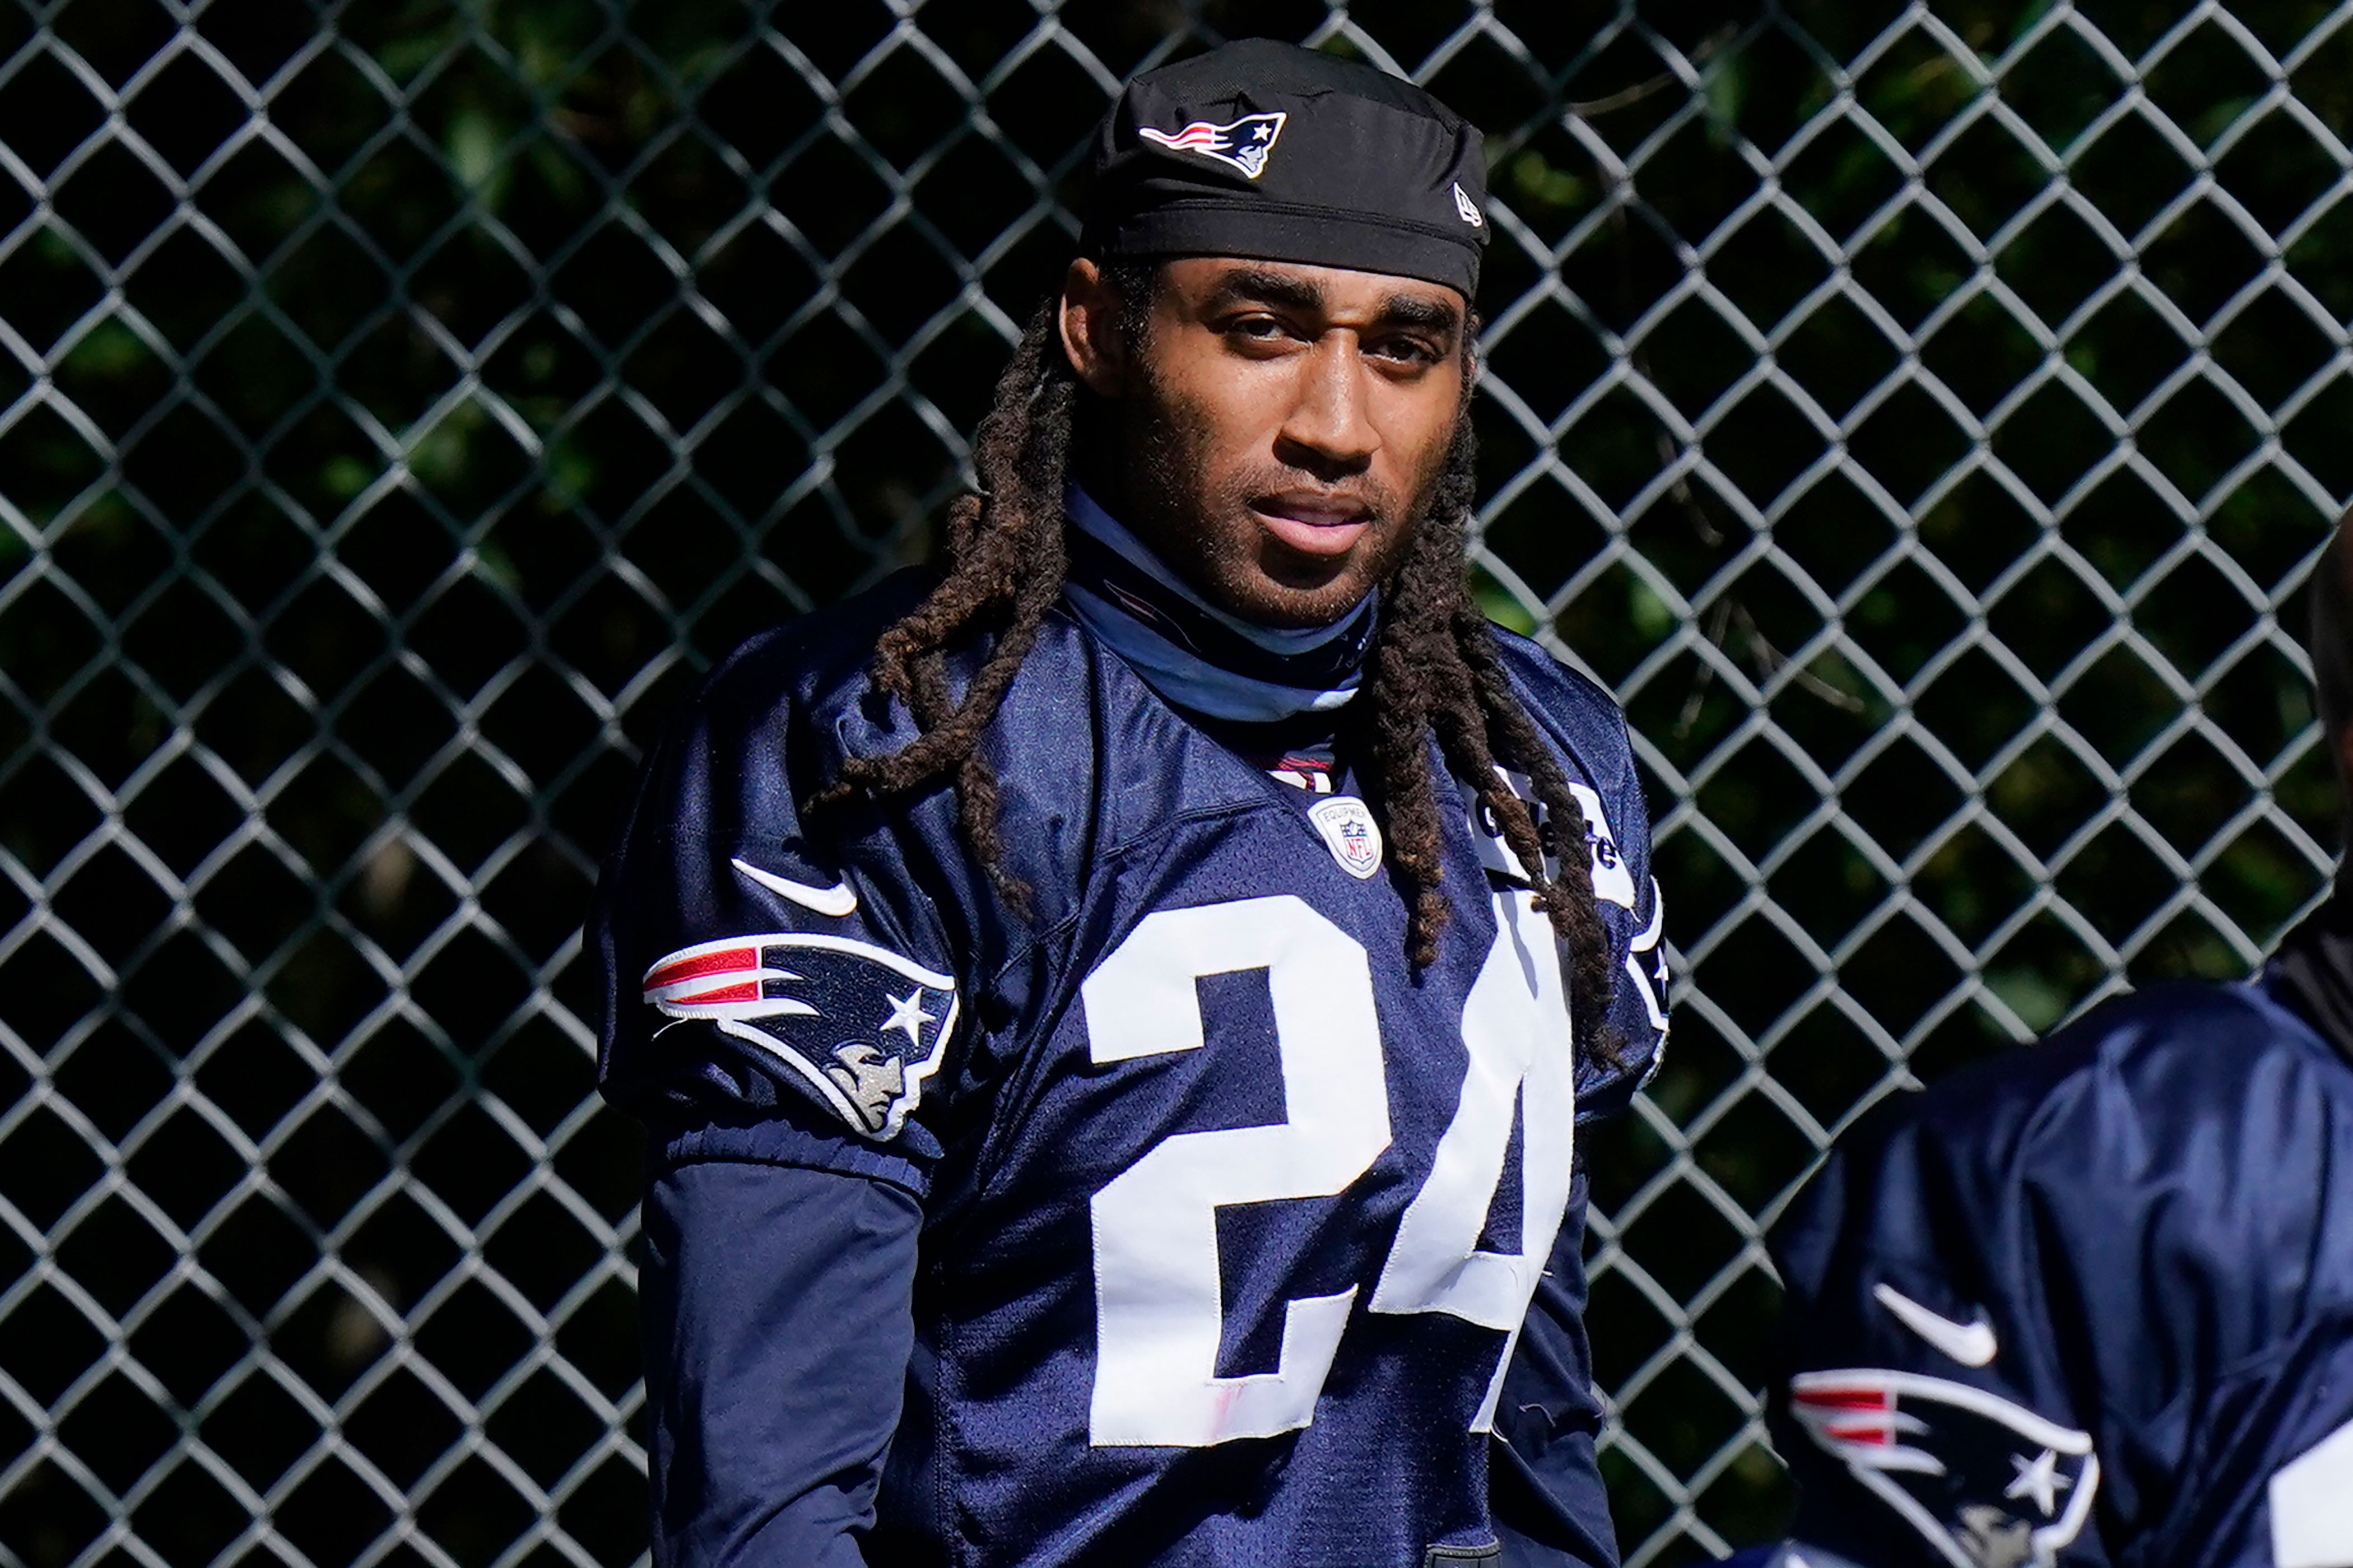 Stephon Gilmore of the New England Patriots attends a training camp practice in Foxborough, Massachusetts, on August 30.